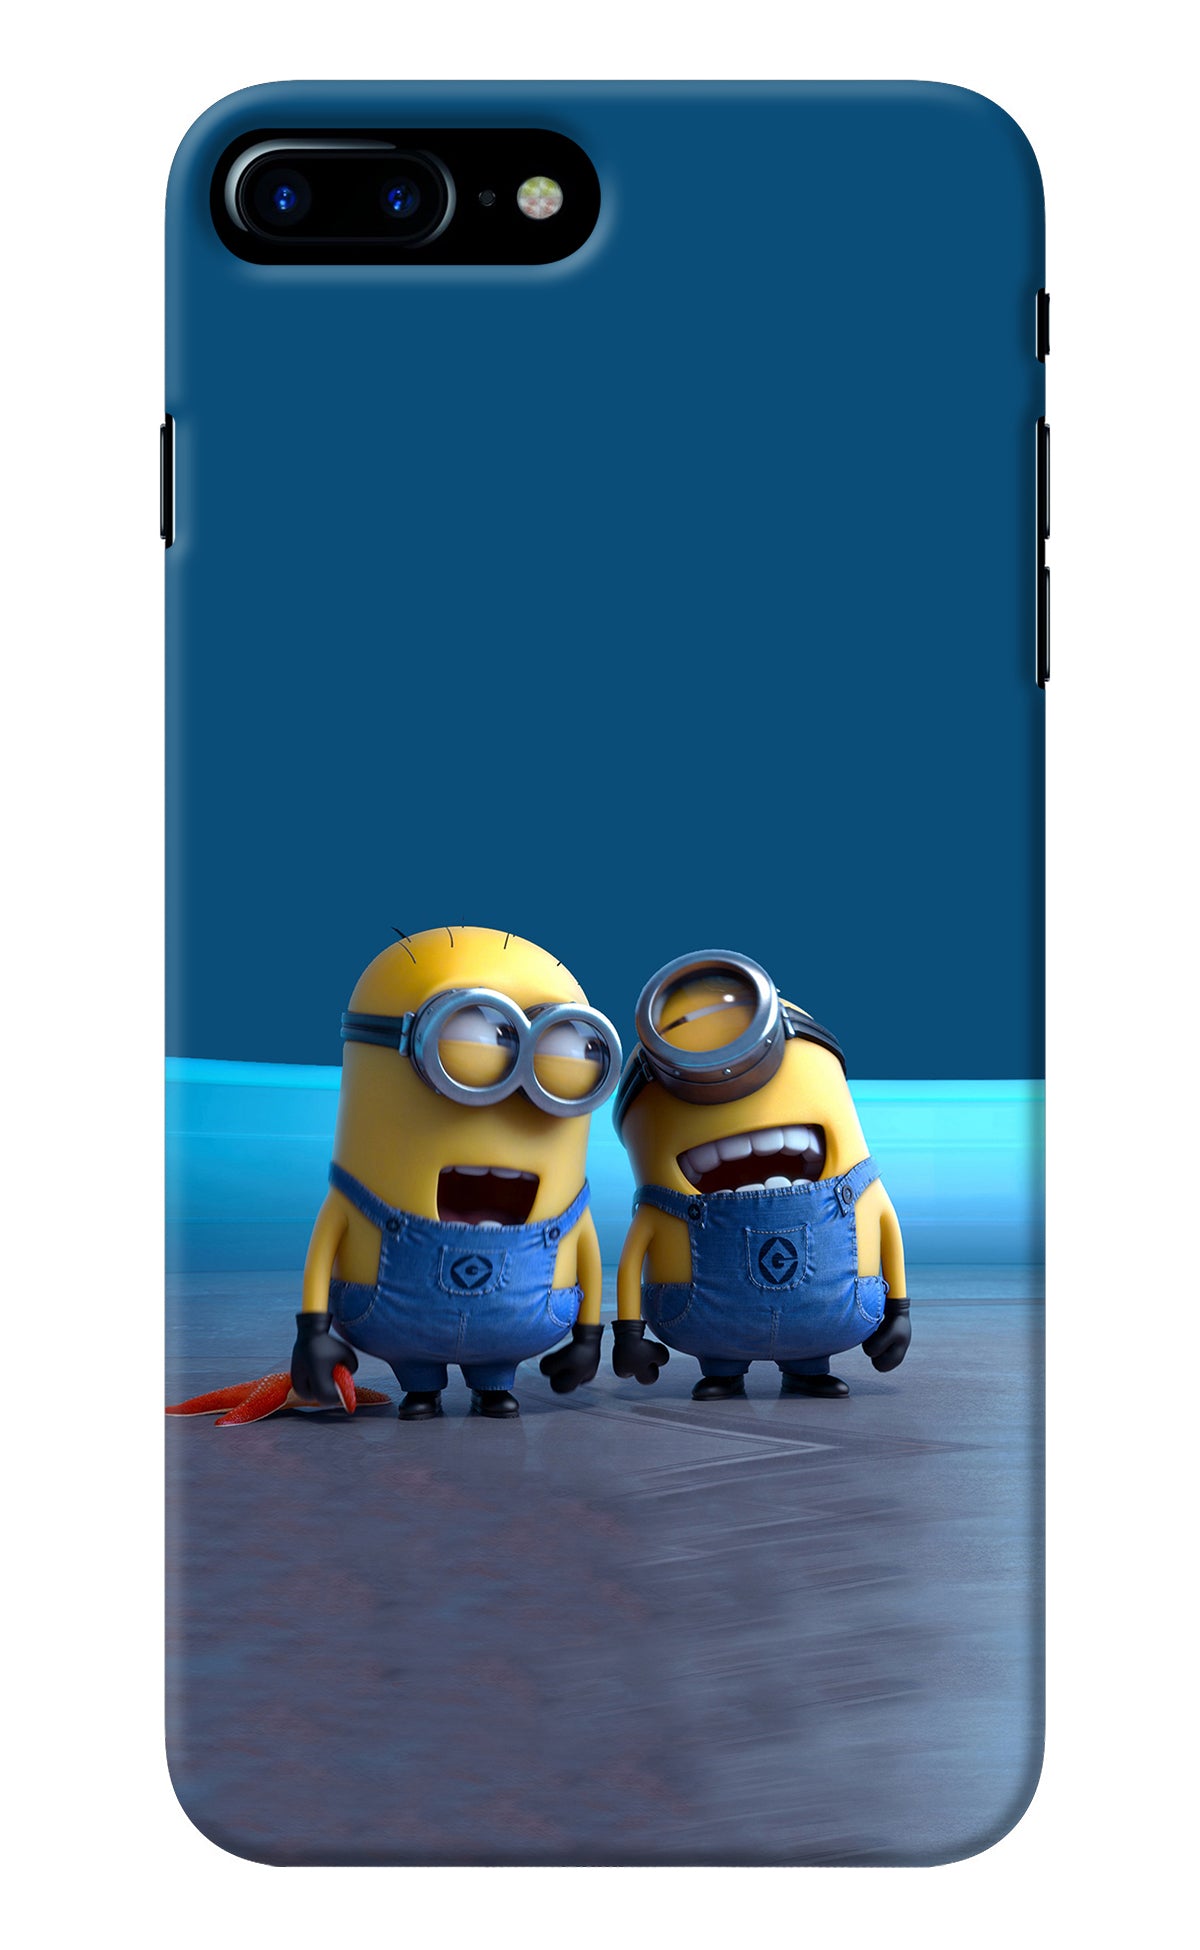 Minion Laughing iPhone 8 Plus Back Cover